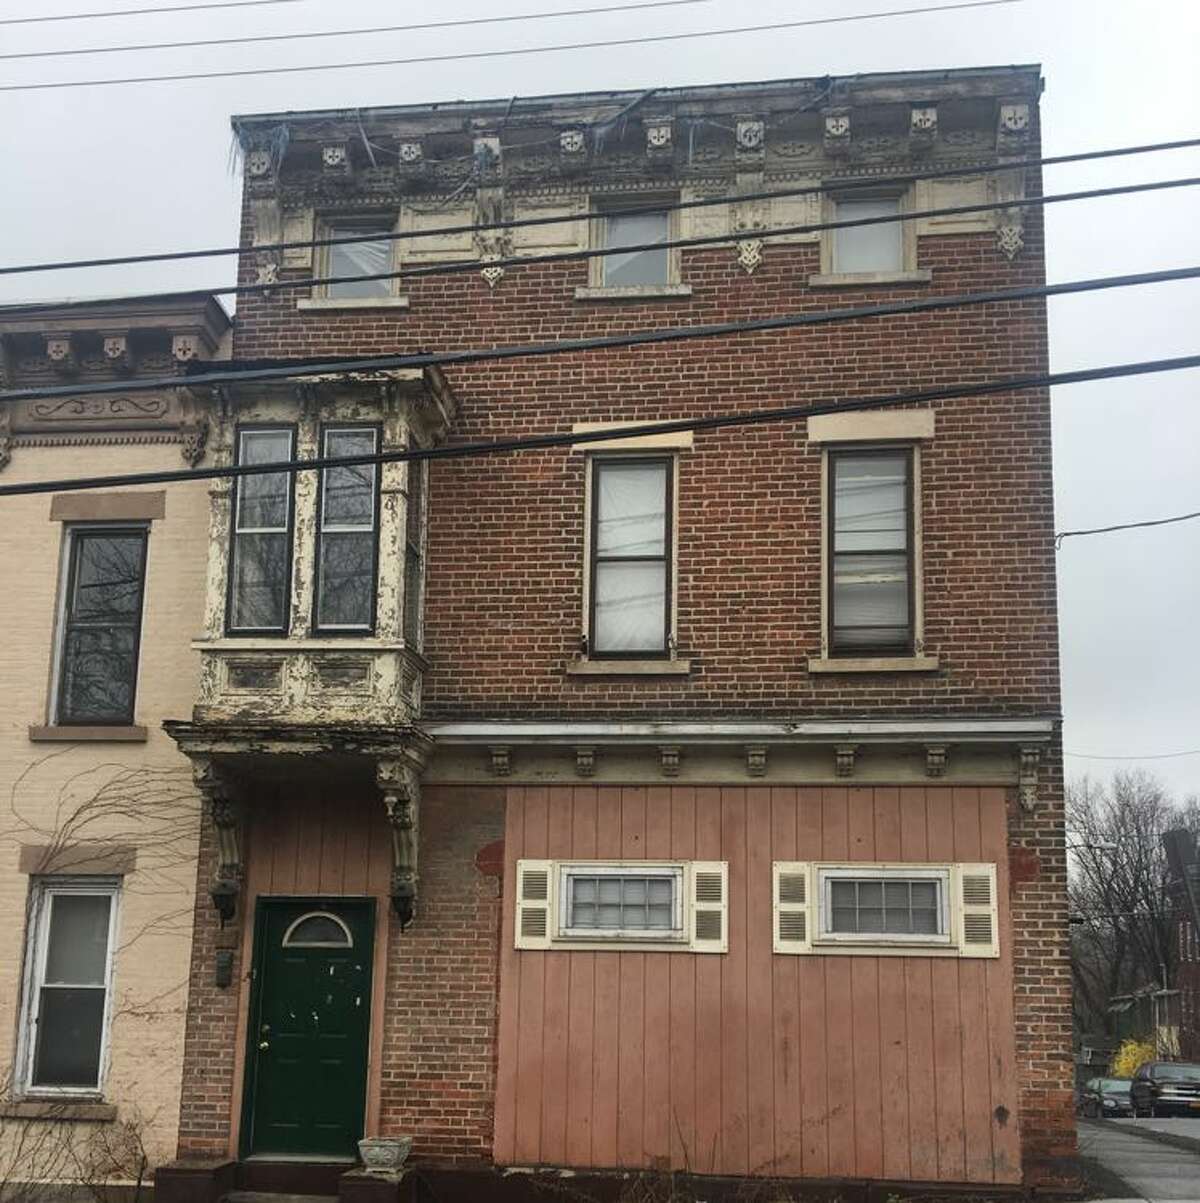 Albany County received $1 million to rehab three, two family homes along Second Avenue.